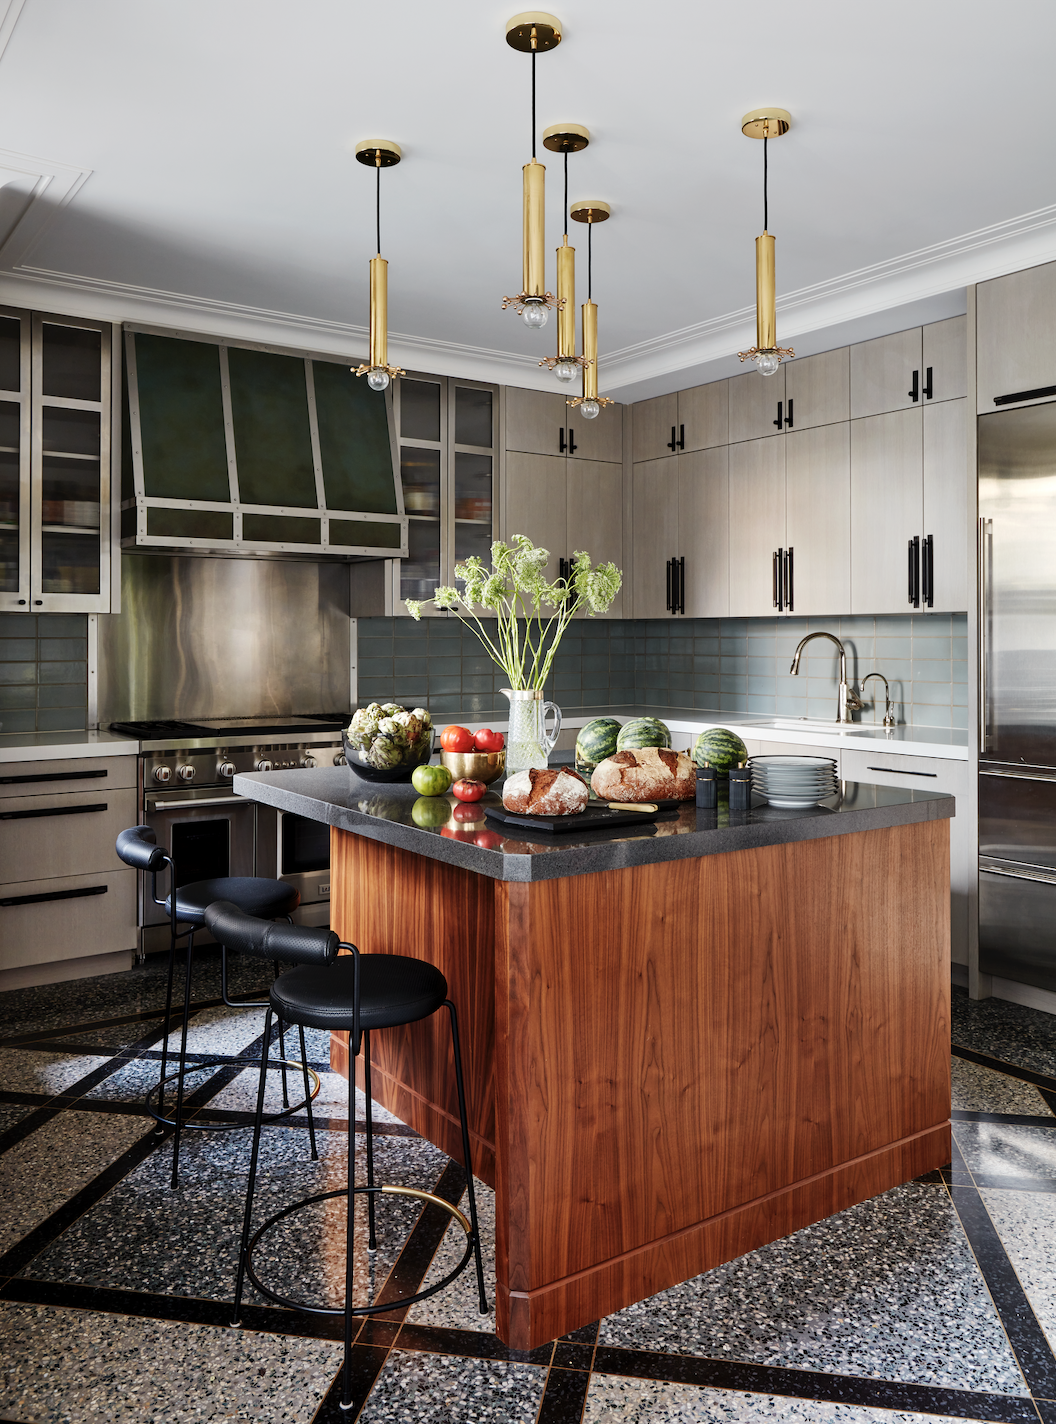 20+ Inspiring Modern Kitchens We Can't Stop Swooning Over